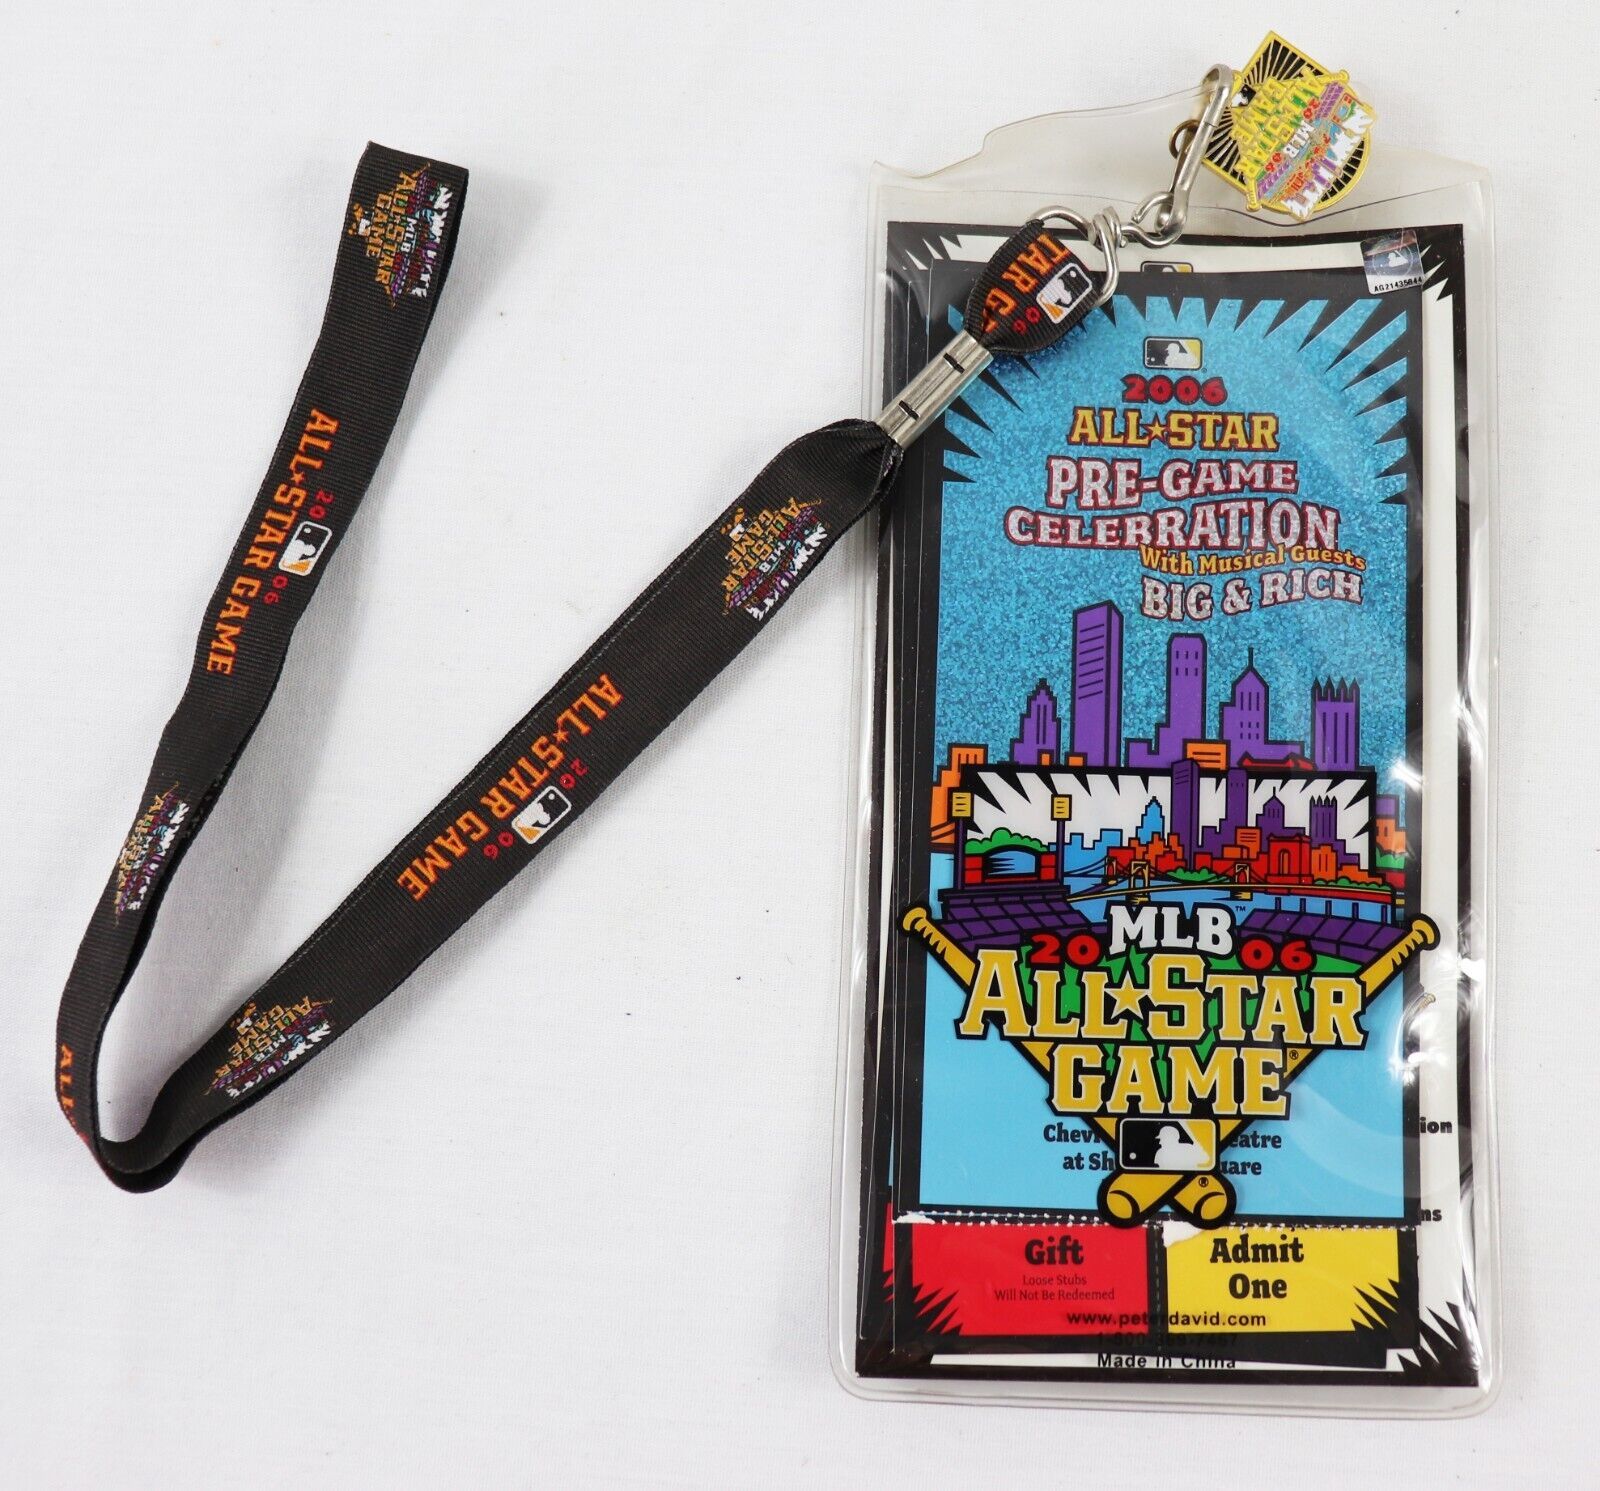 Primary image for (2) 2006 MLB All Star Game Pittsburgh Pregame Tickets w/ Lanyard Big & Rich